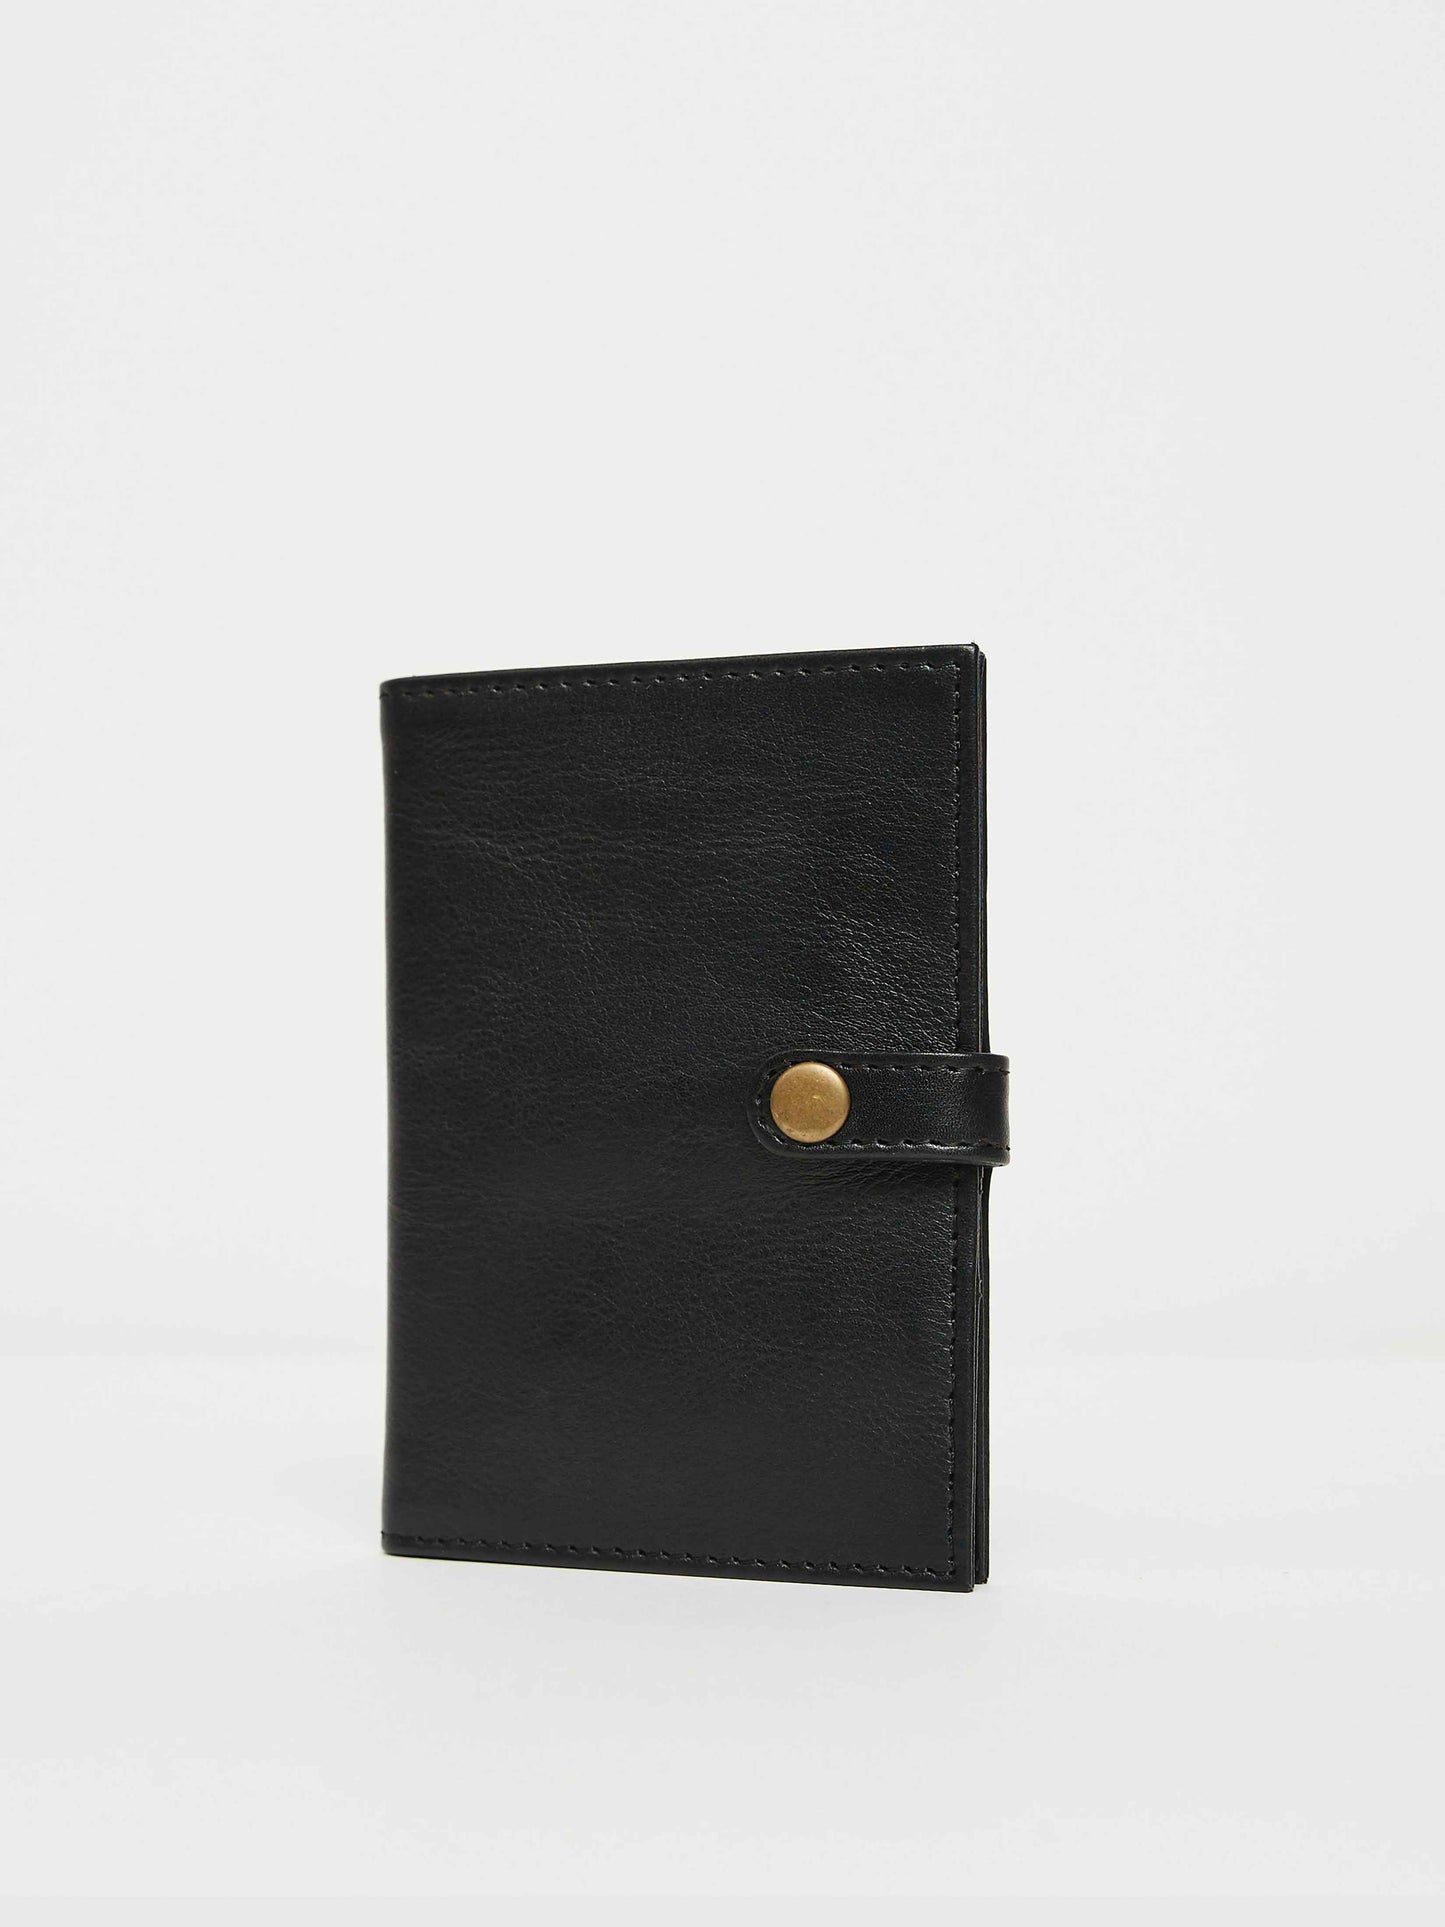 Black Leather Travel wallet -Passport wallets by payton james- leather bags nashville